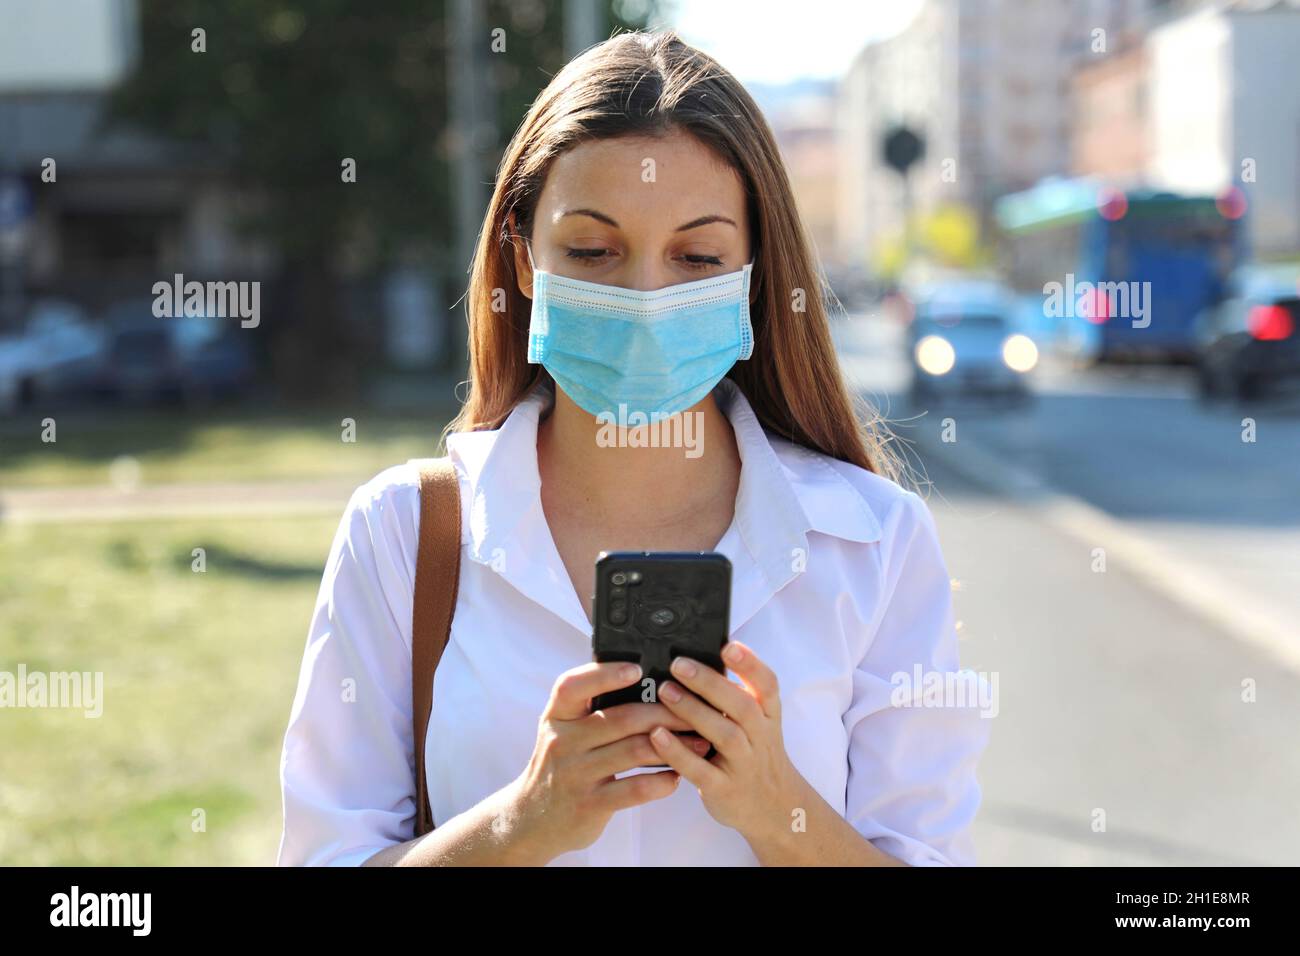 COVID-19 Pandemic Coronavirus Young Woman Wearing Surgical Mask Using Smart Phone App in City Street to Aid Contact Tracing in Response to the 2019-20 Stock Photo